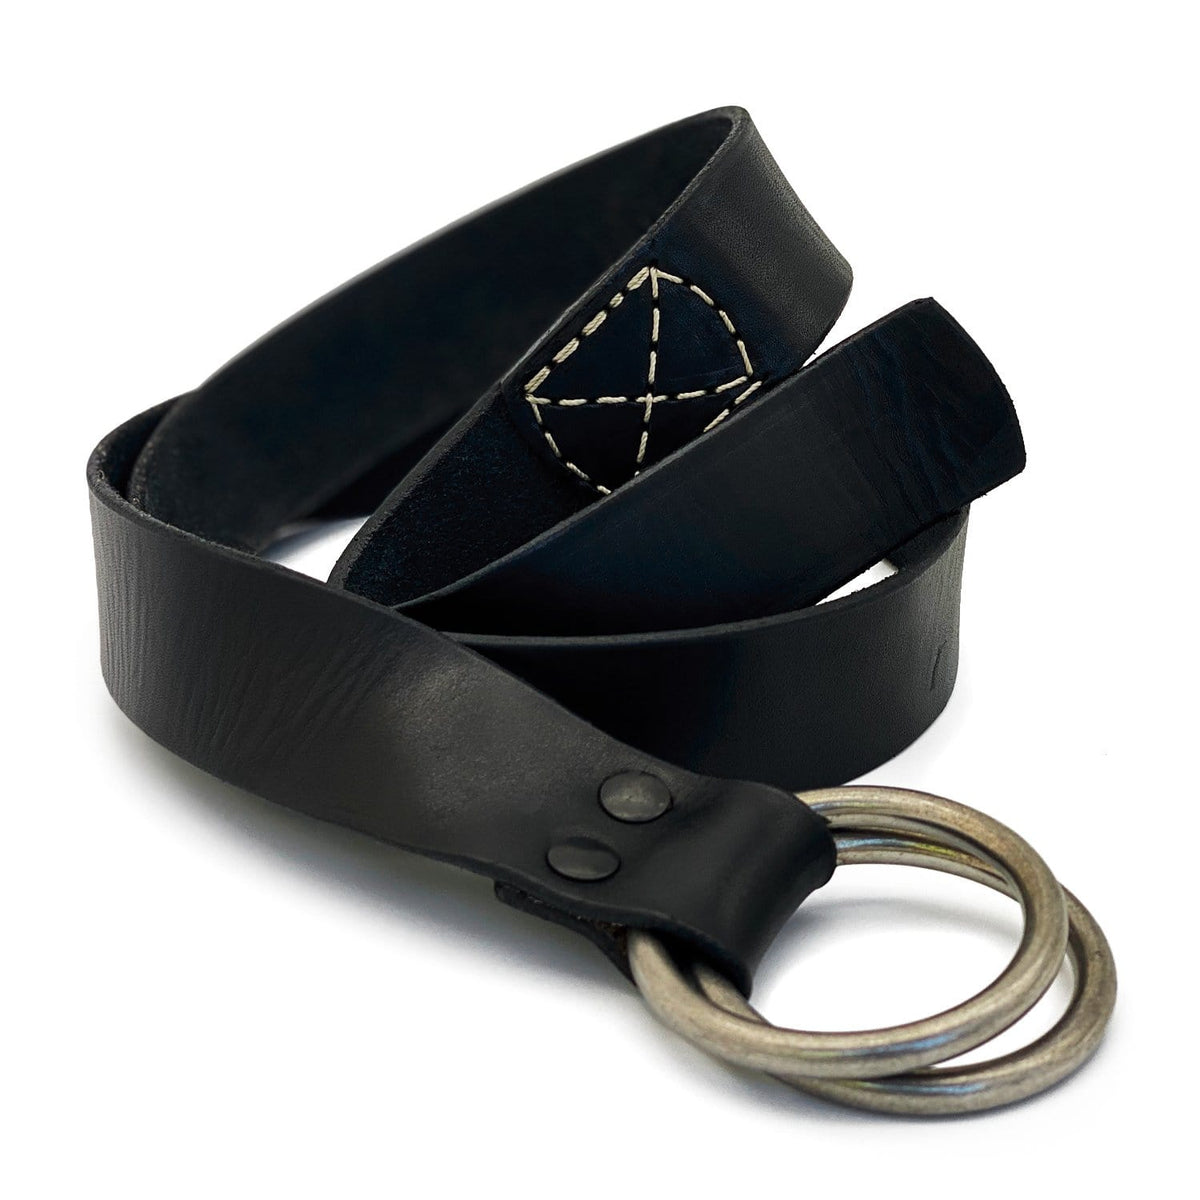 The Sausalito Double Ring 1.5 Classic Black Leather Belt